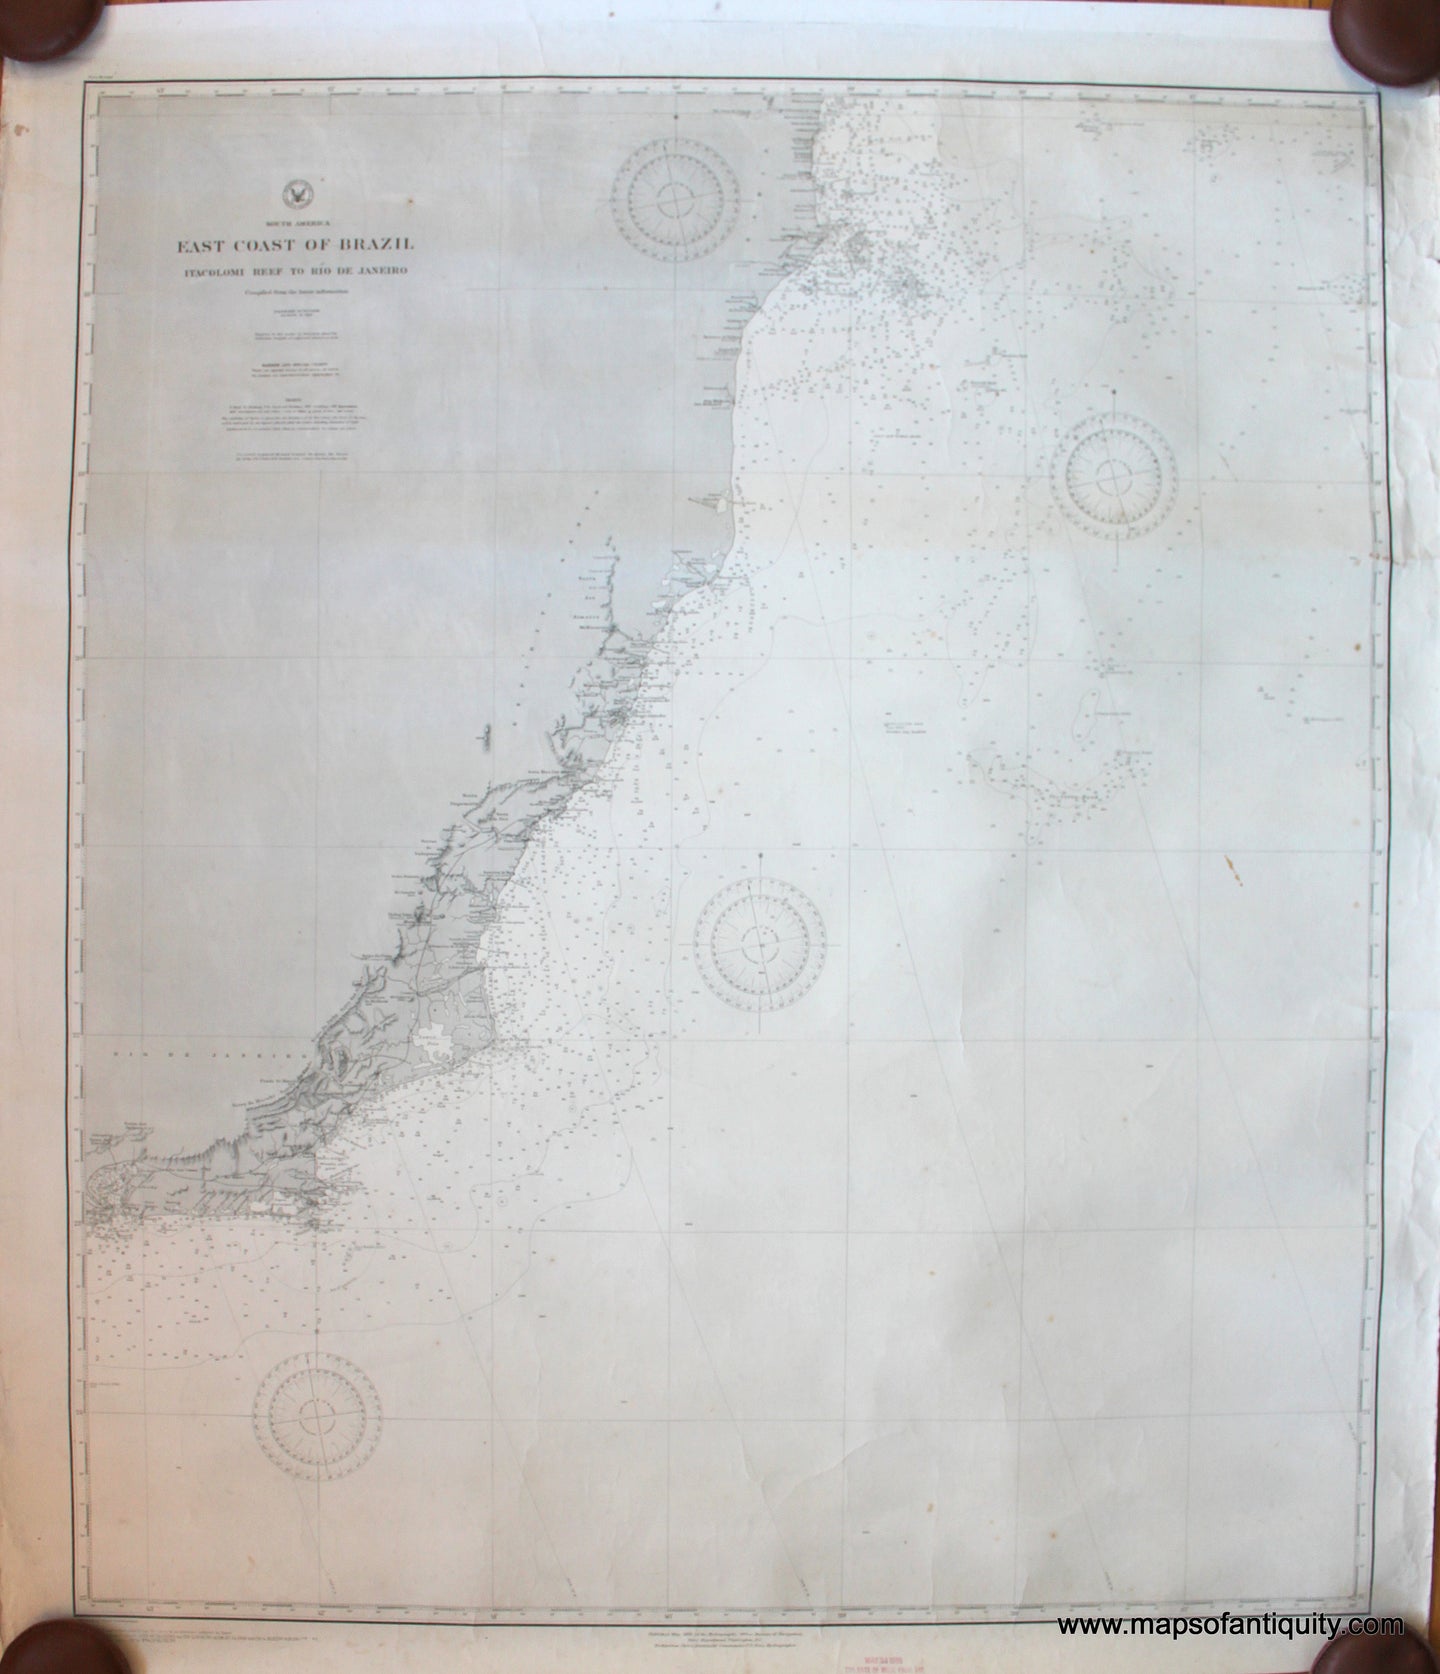 Antique-Nautical-Chart-East-Coast-of-Brazil---Itacolomi-Reef-to-Rio-de-Janeiro-Nautical-Charts-South-America-1904-Department-of-the-Navy-Maps-Of-Antiquity